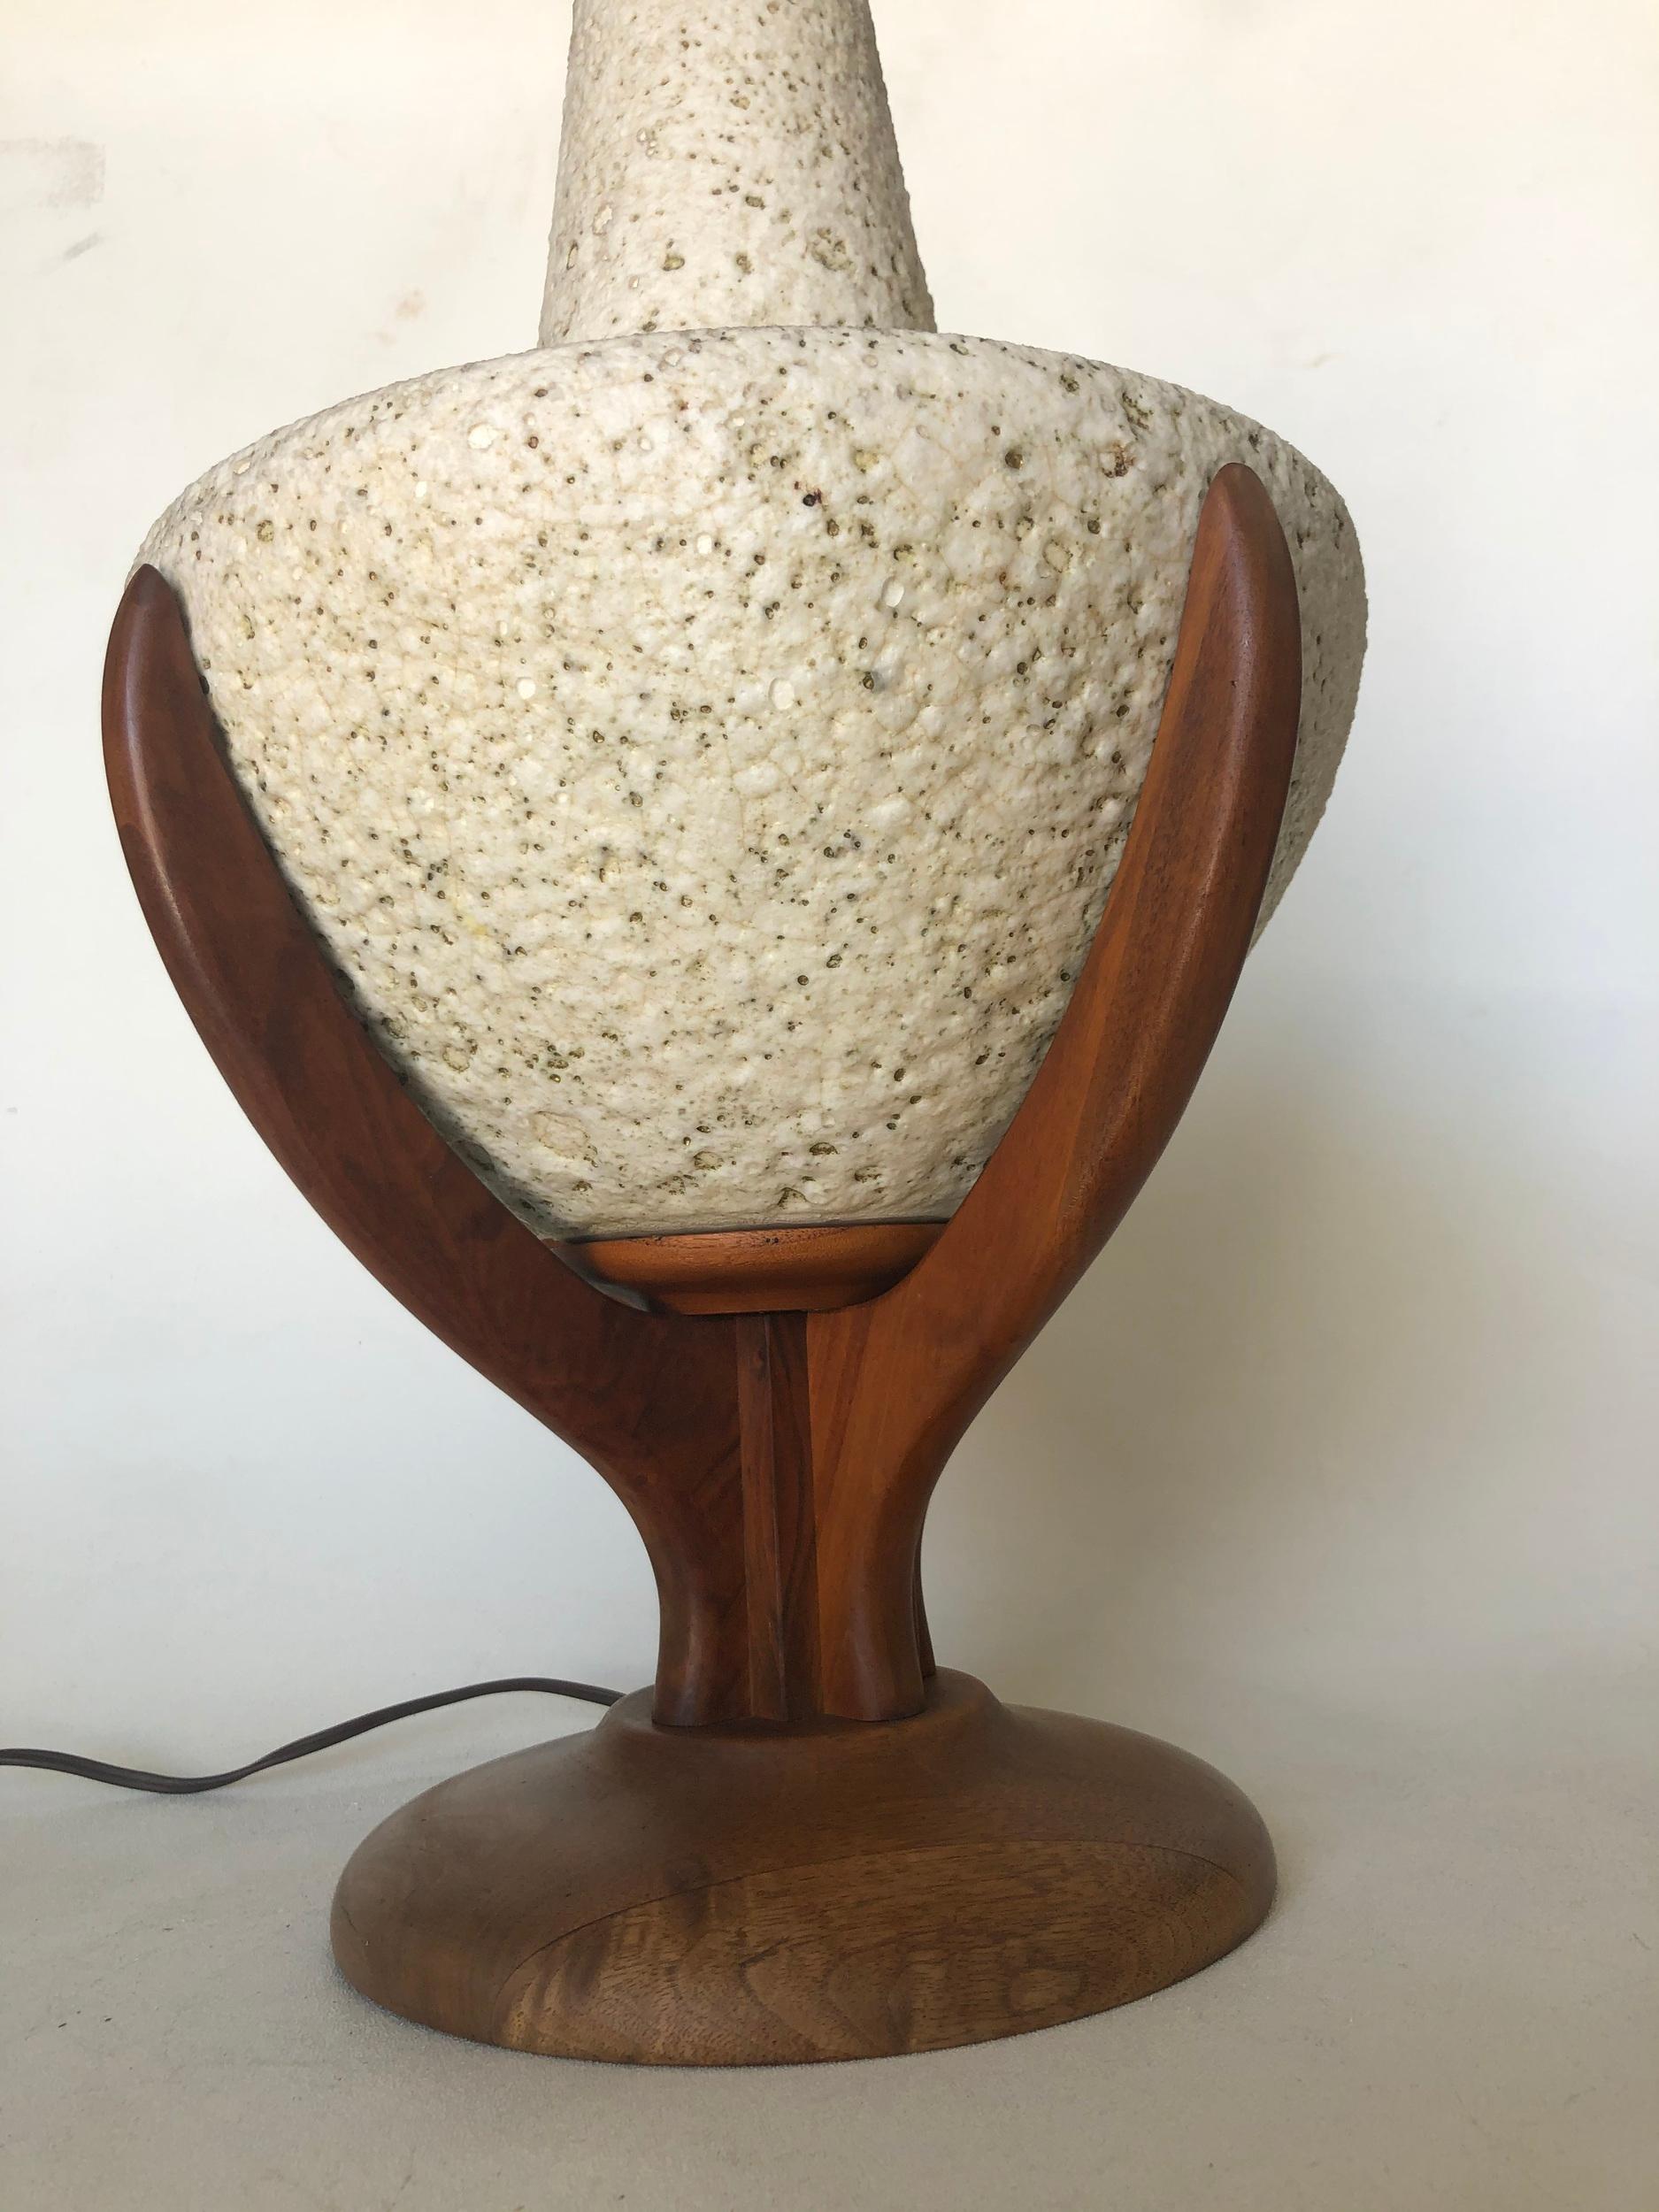 Atomic Age Pebble Stone and Teak Table Lamp In Excellent Condition For Sale In Van Nuys, CA